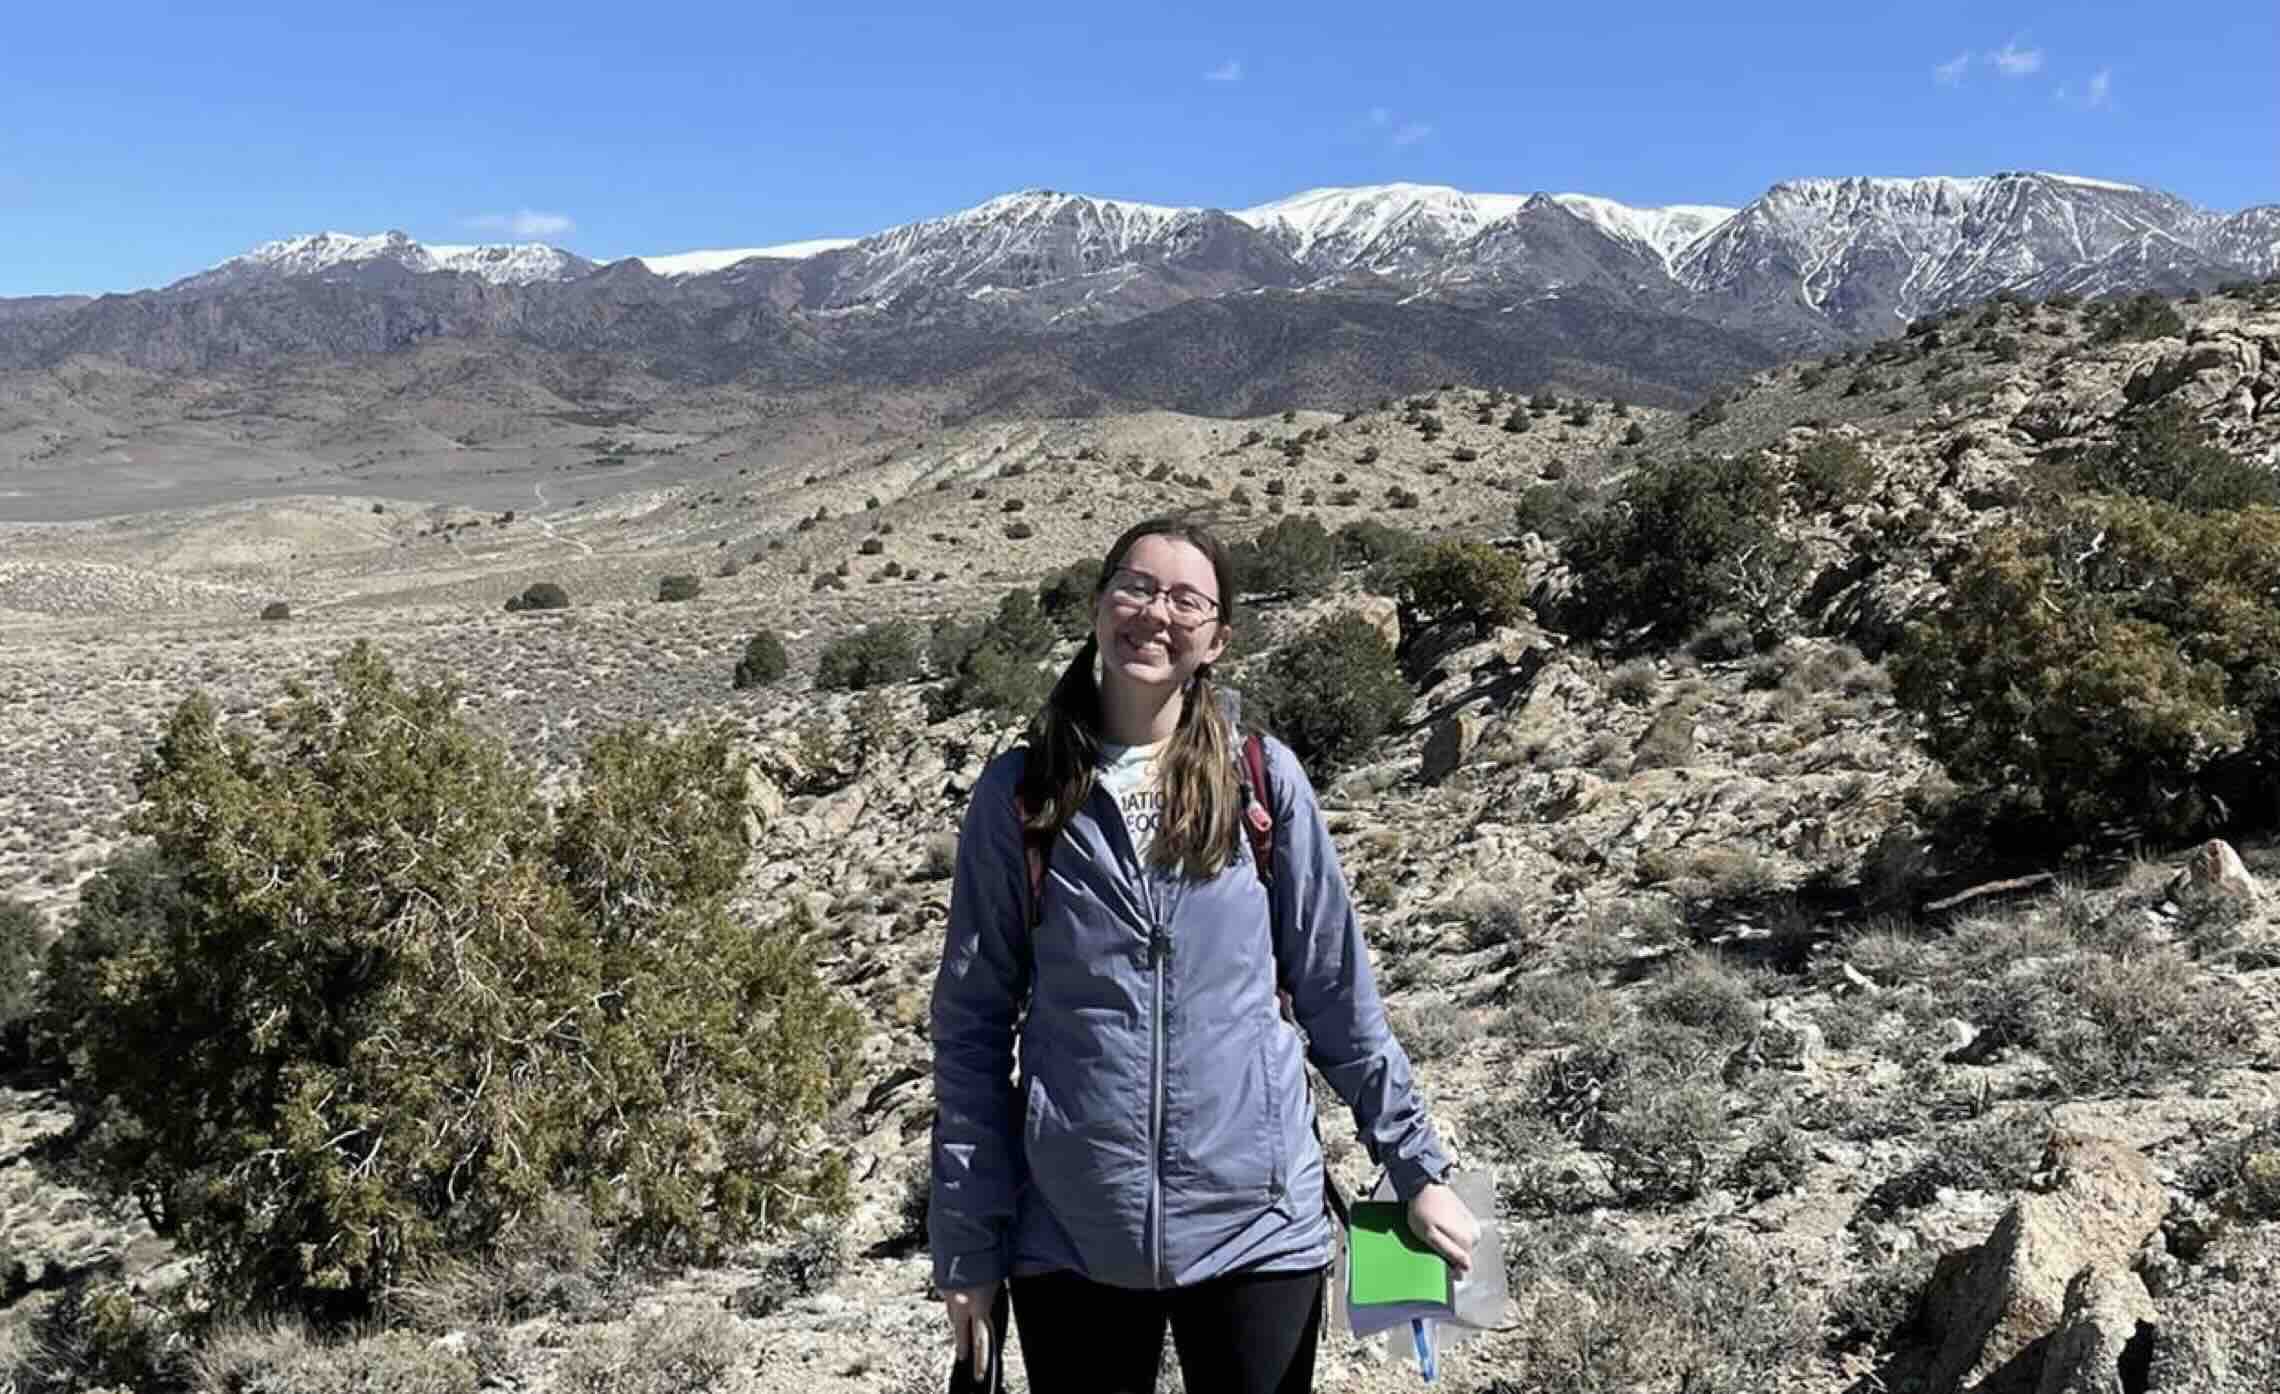 Landon Stitle collecting samples in Nevada for the spring 2022 GSA conference